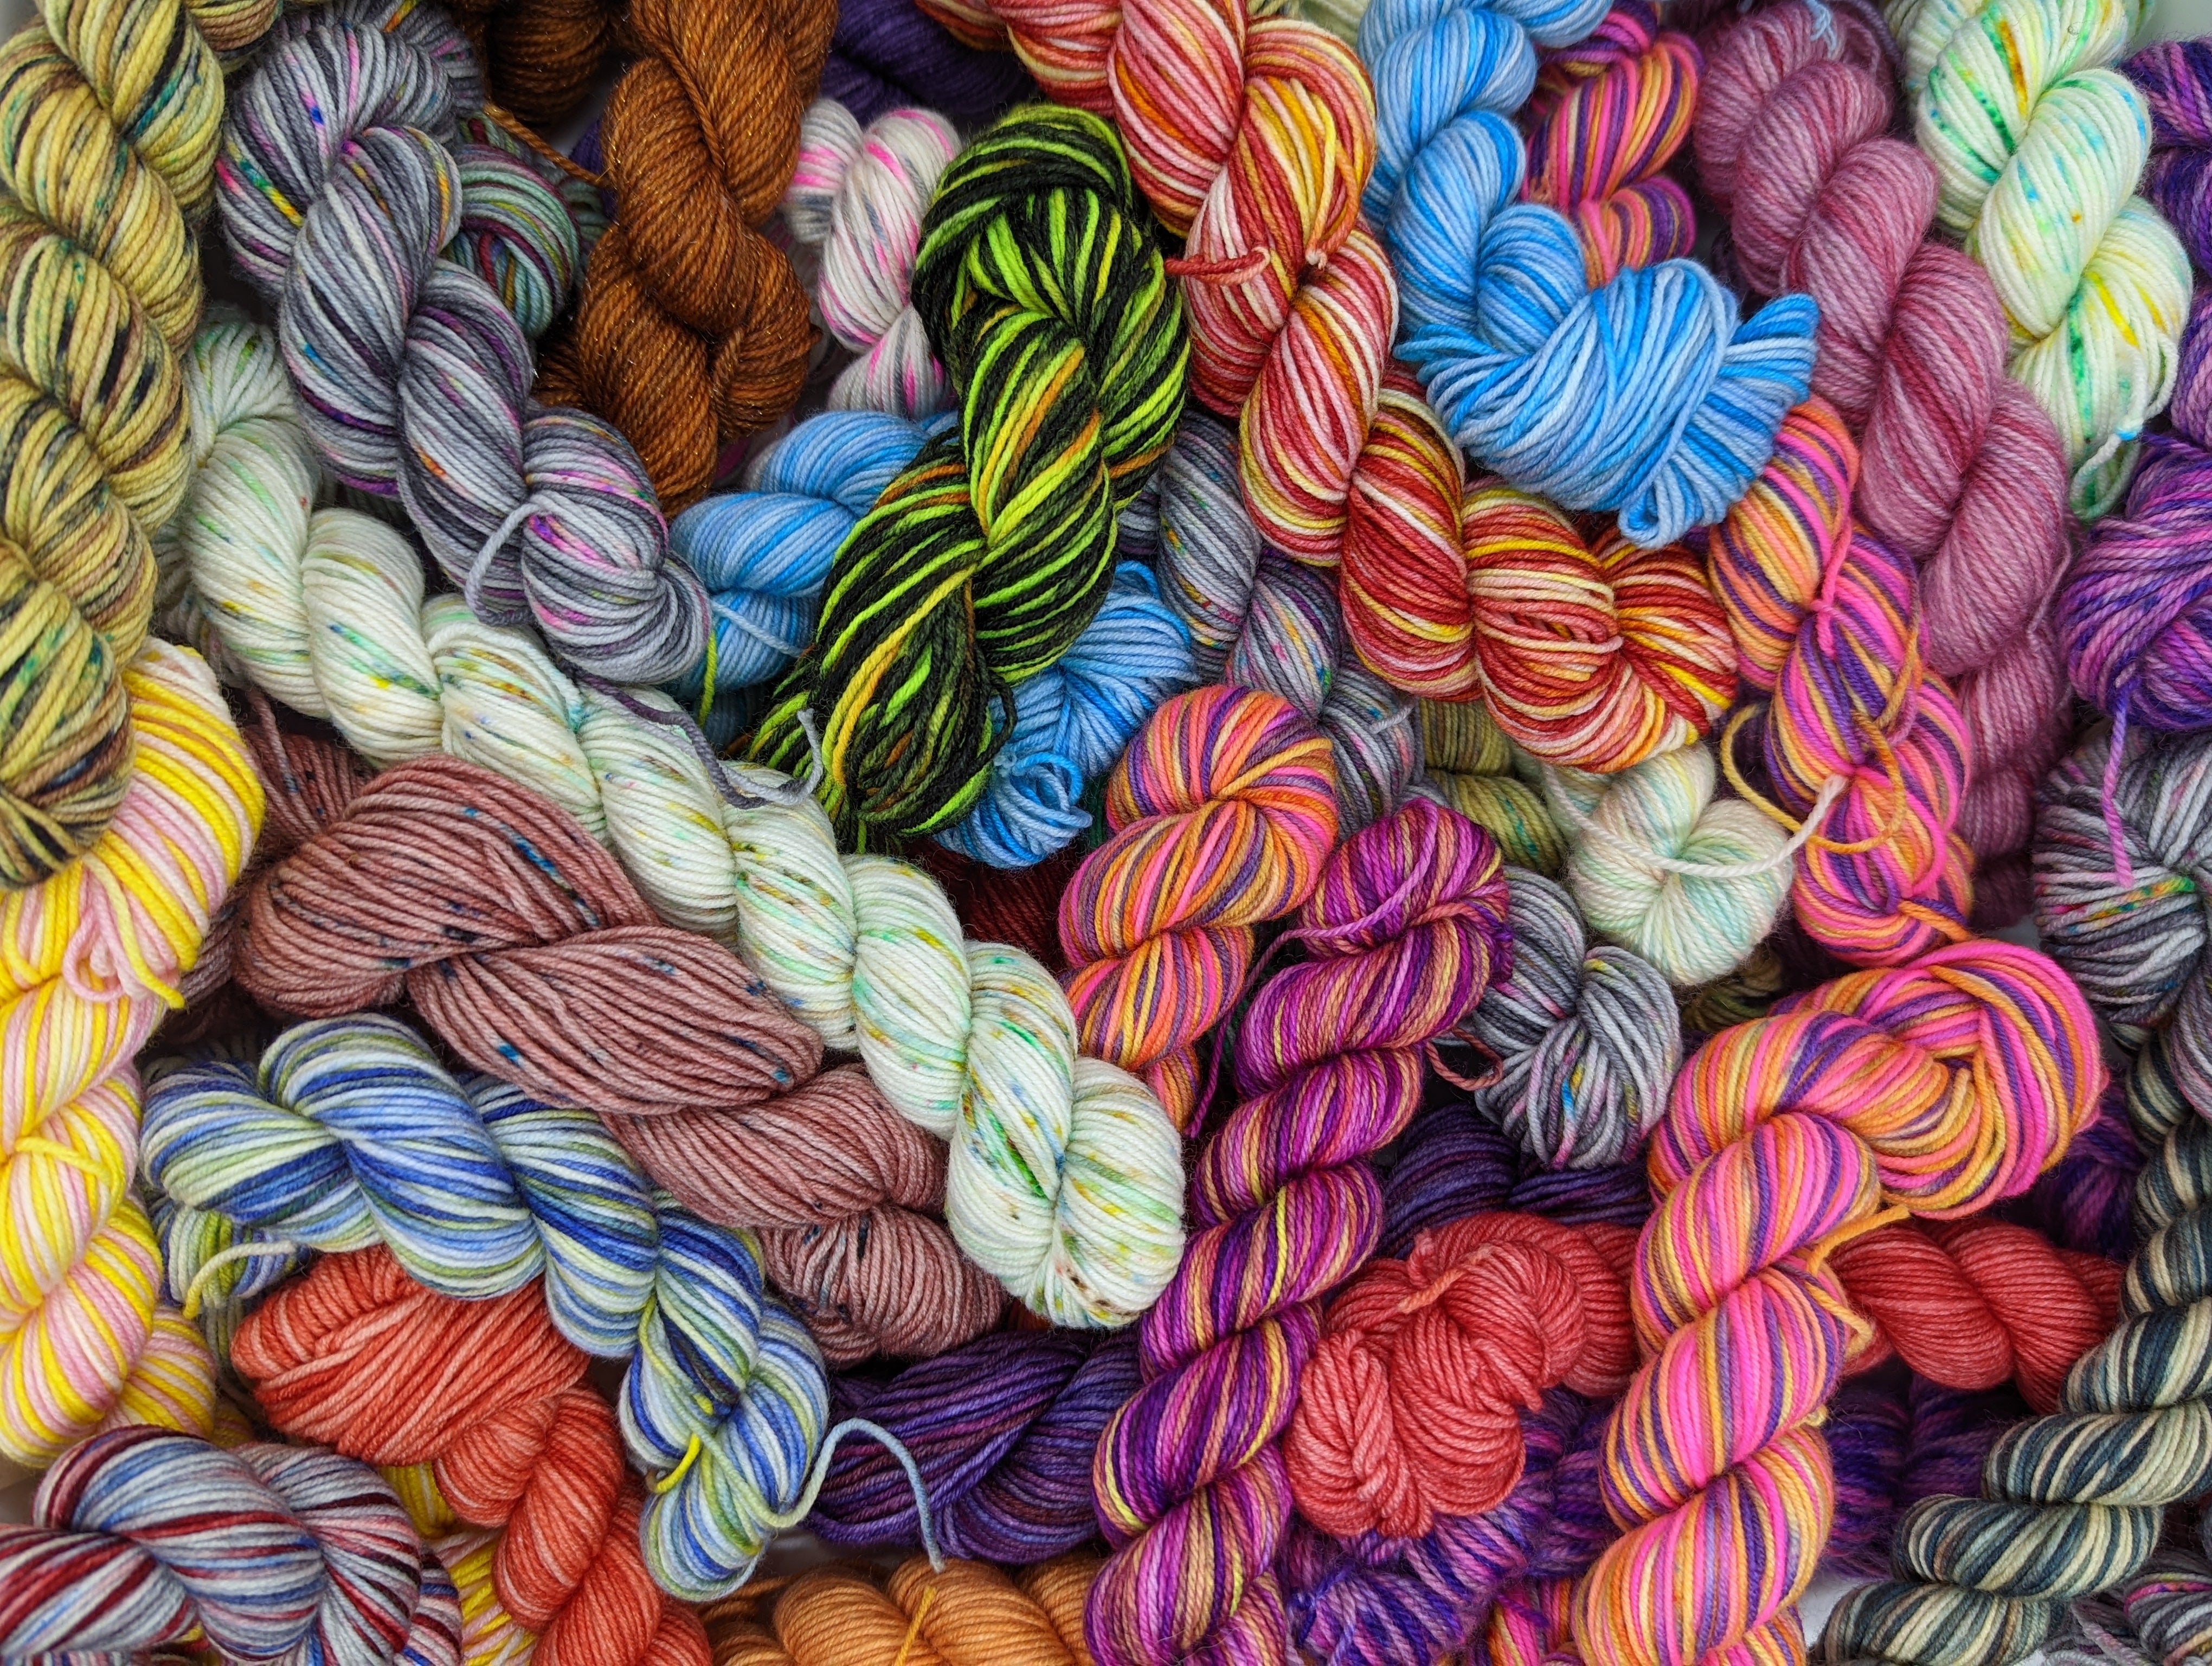 1 Mystery Mini Skein - Worsted Weight